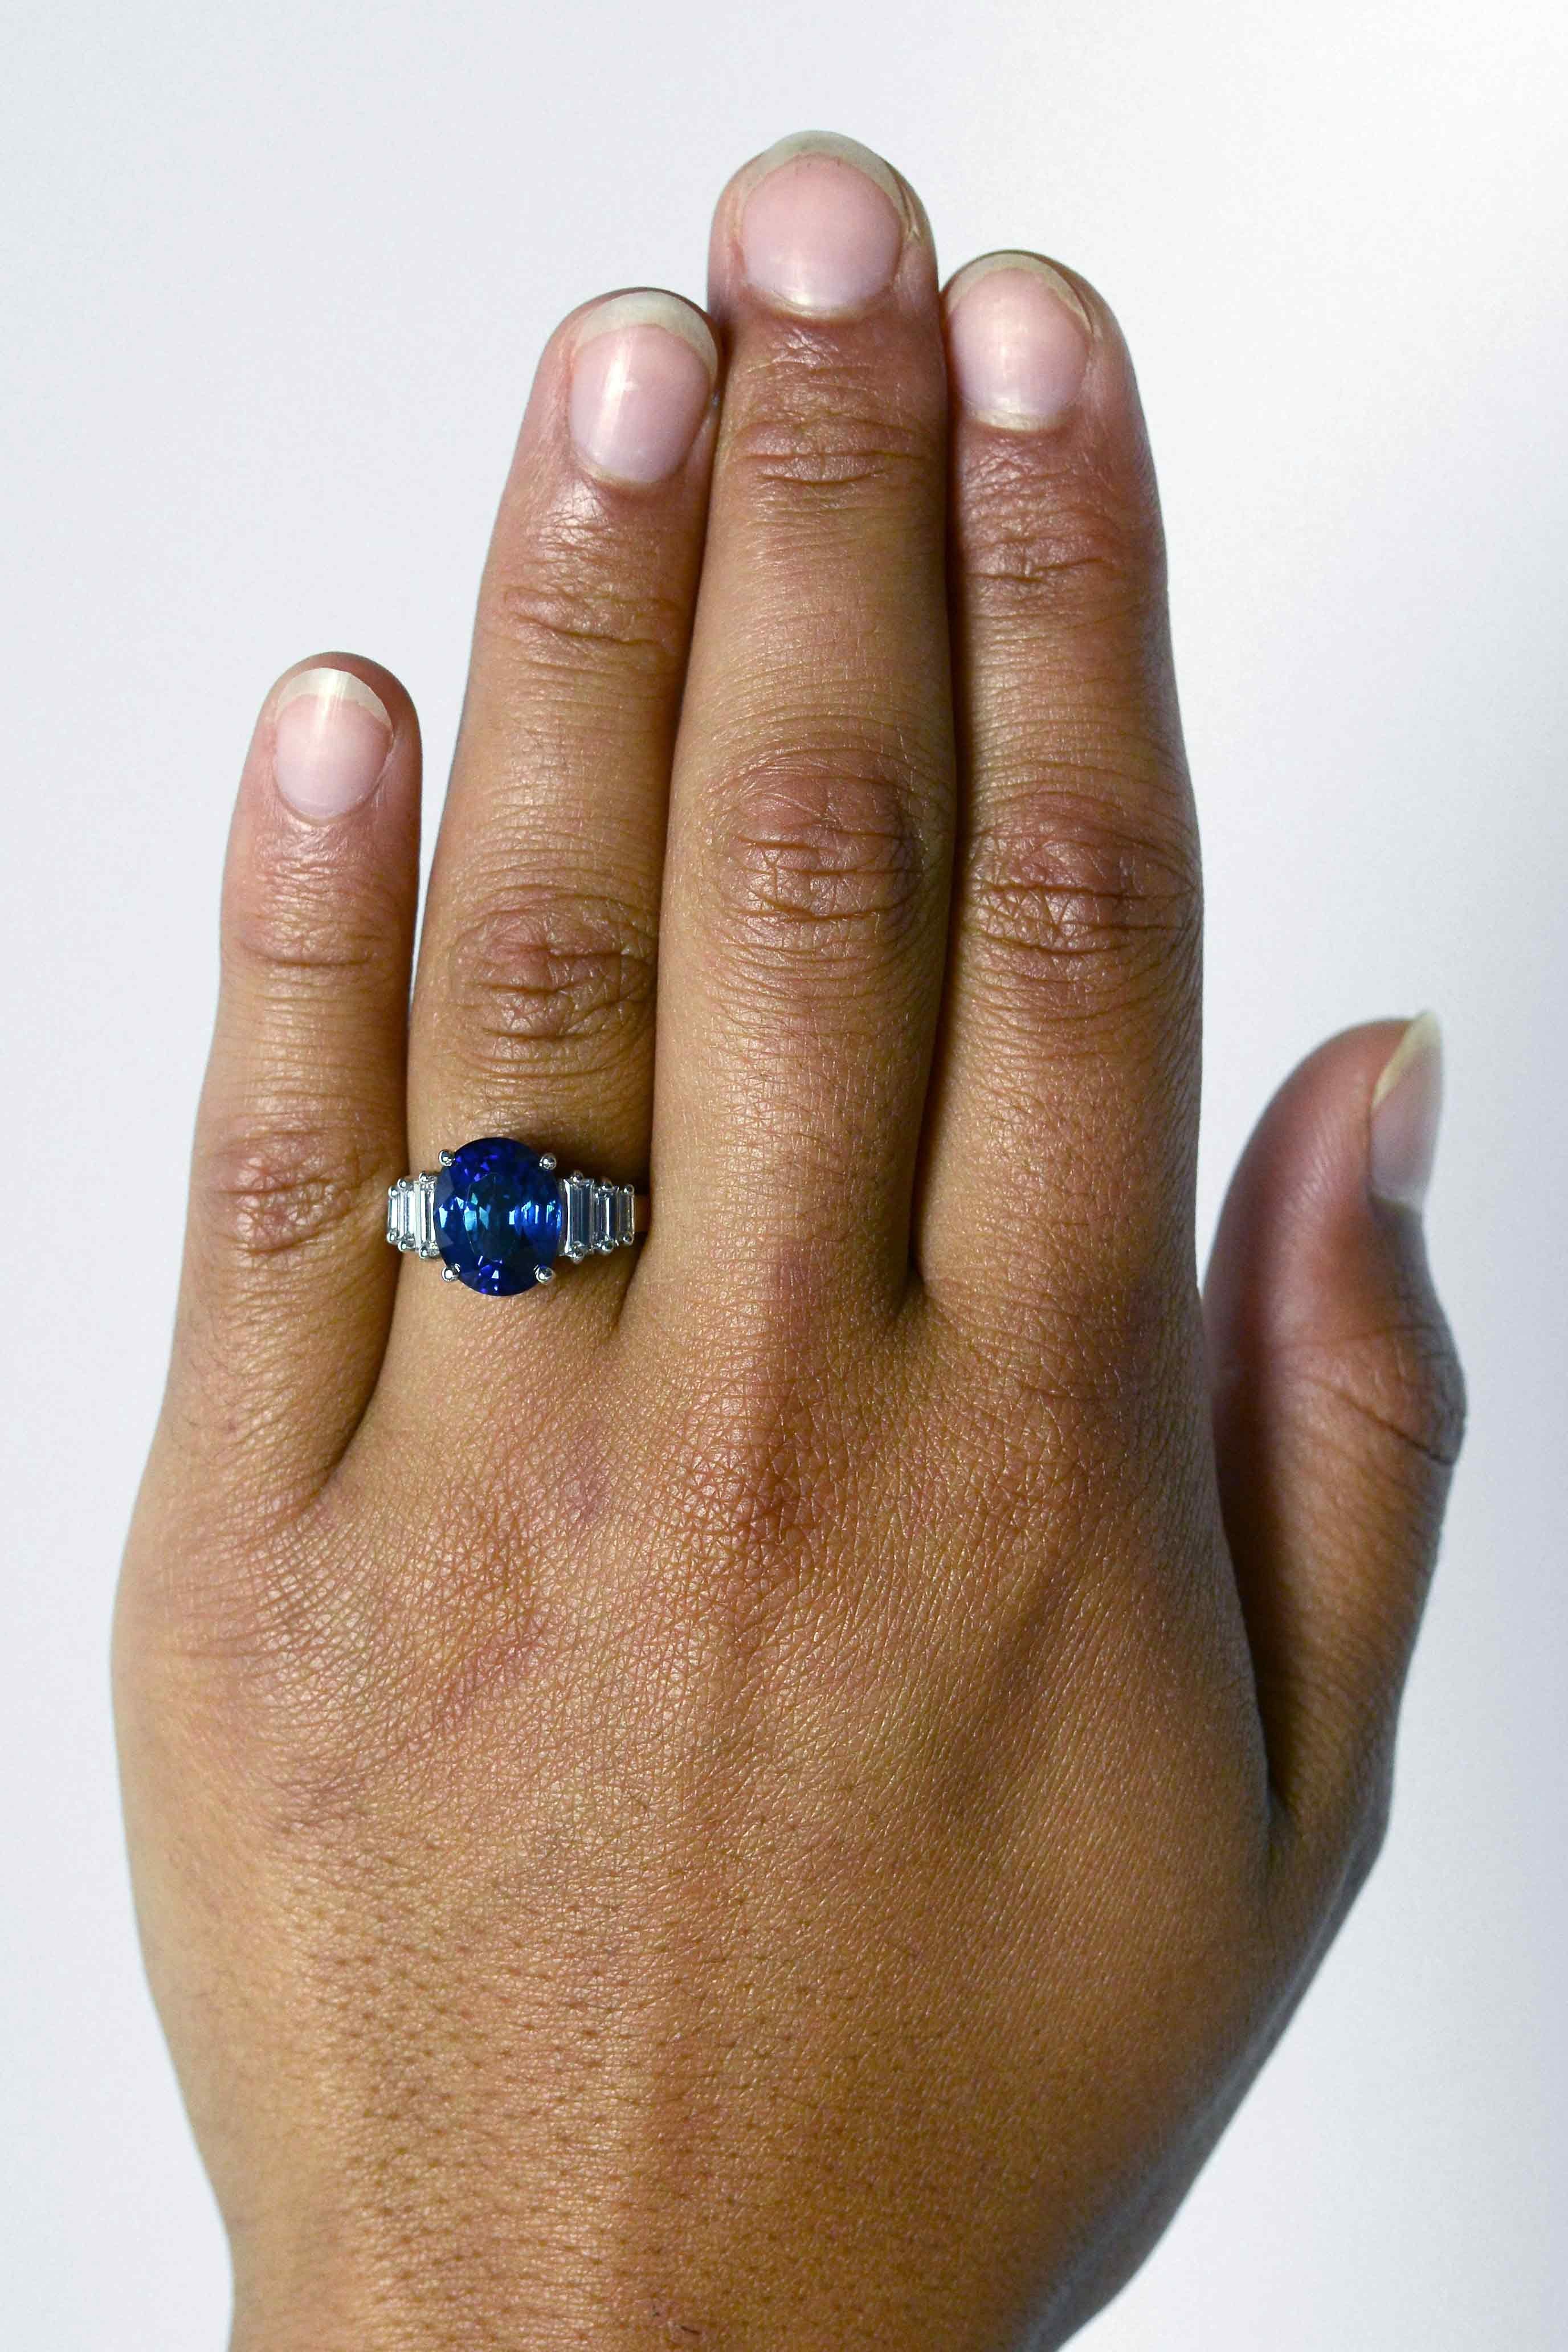 This item is currently on hold for a customer. Please do not purchase.

This vivid, natural blue sapphire engagement ring centers on a captivating, GIA certified 4.39 carat oval of a rich, velvety hue. The custom Art Deco design tiered staircase